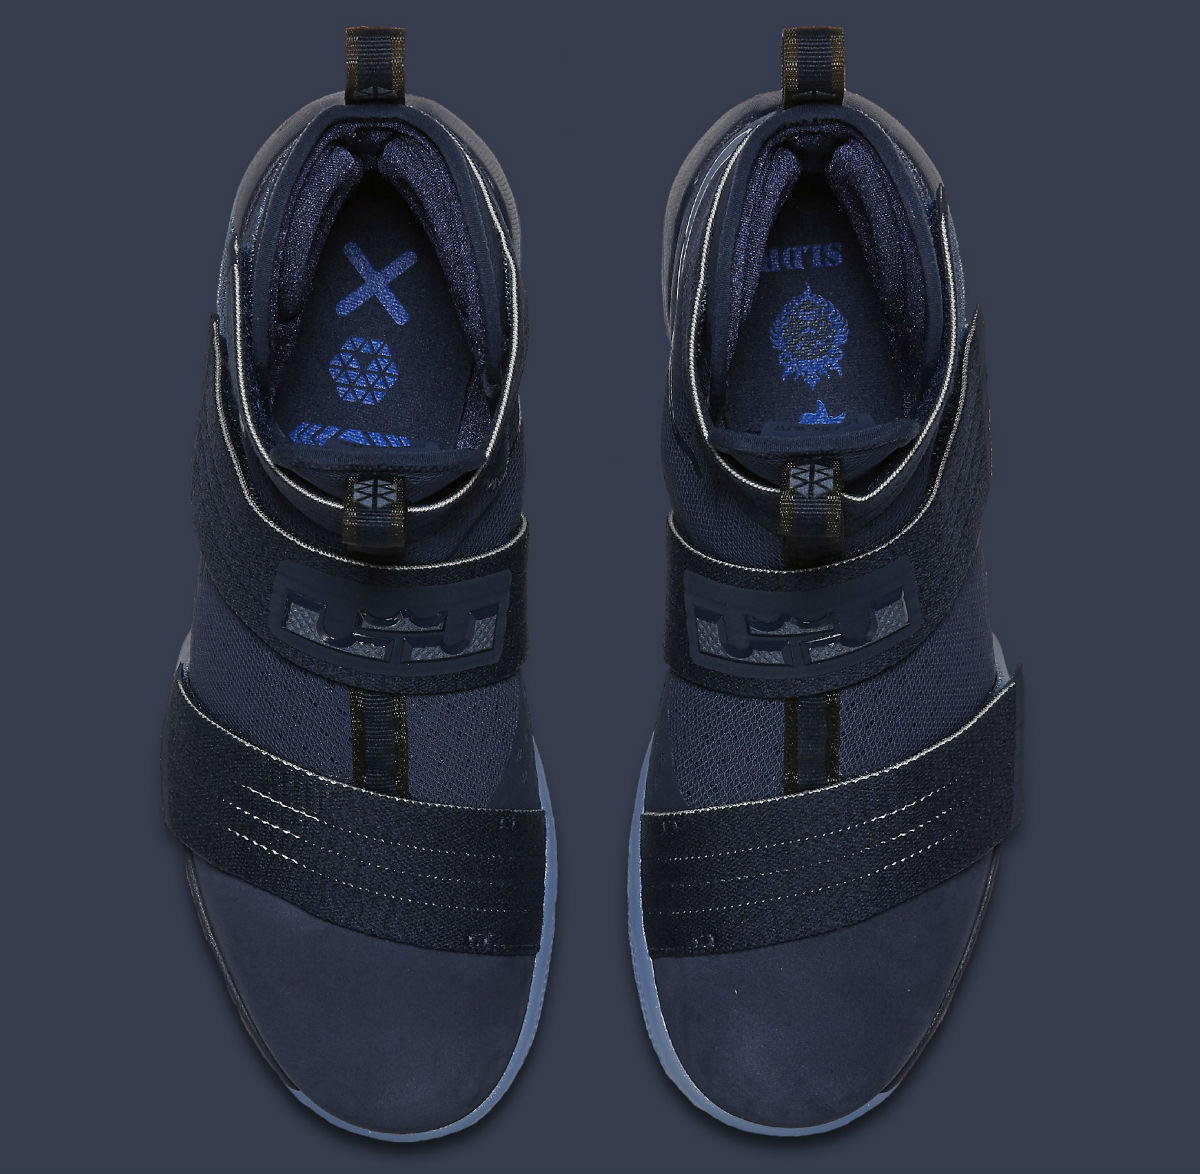 Nike LeBron Soldier 10 Midnight Navy Release Date 844378-444 | Sole ...